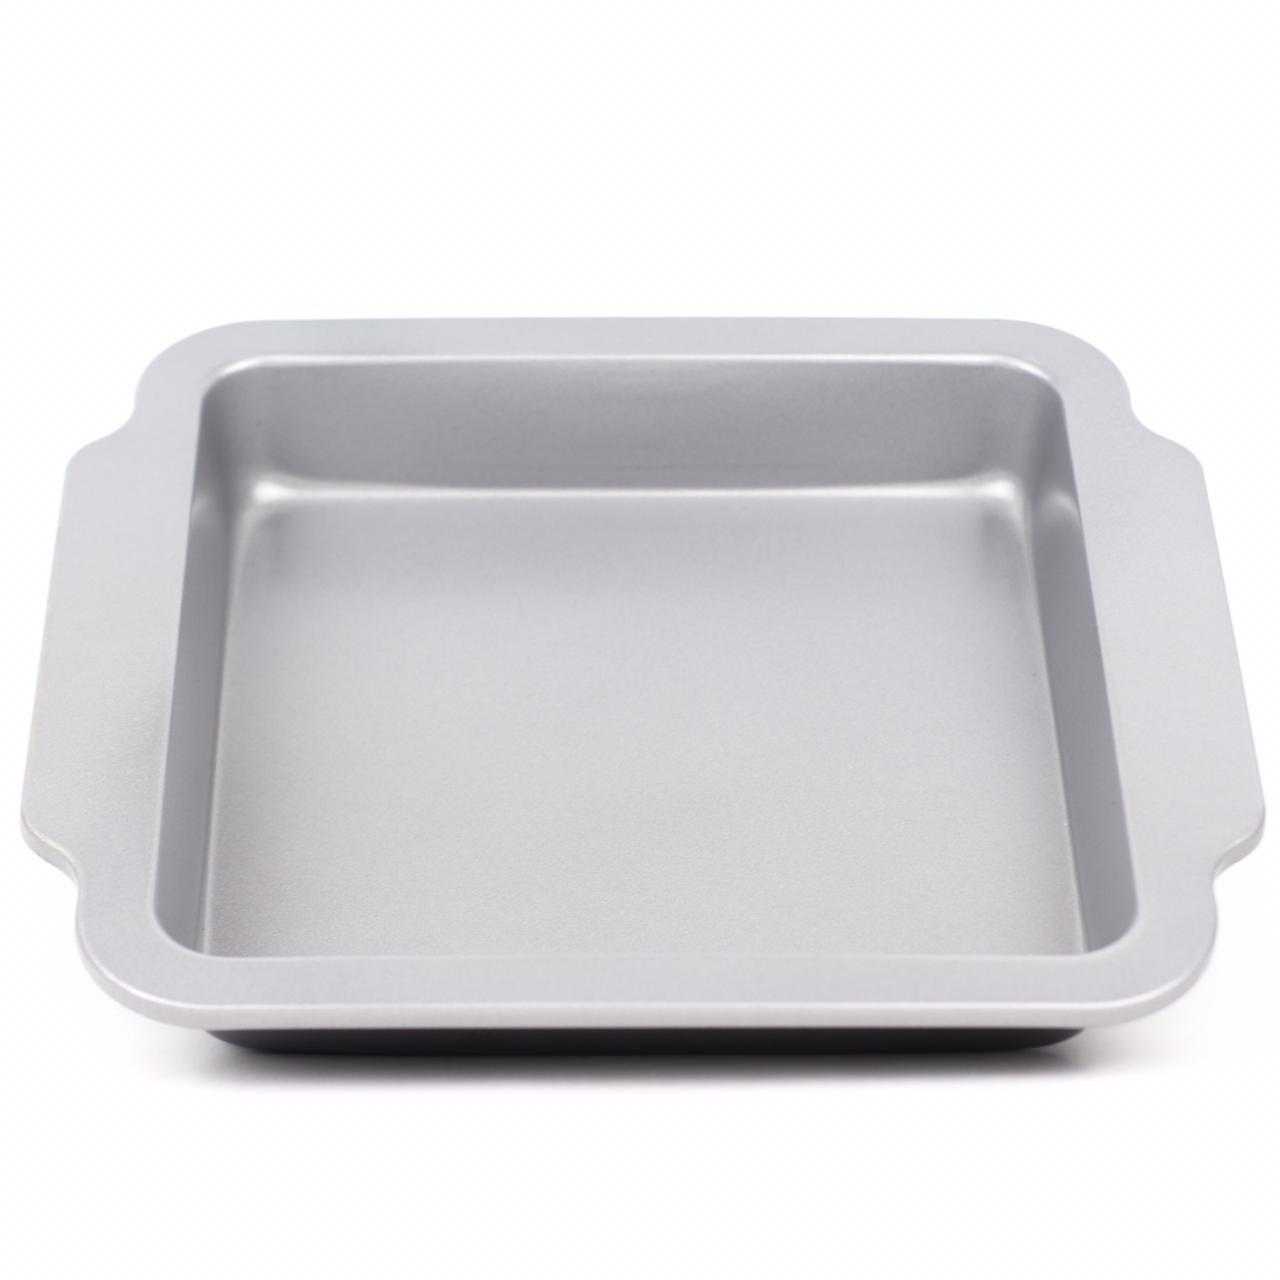 Square shaped easy to hold Bake ware - waseeh.com